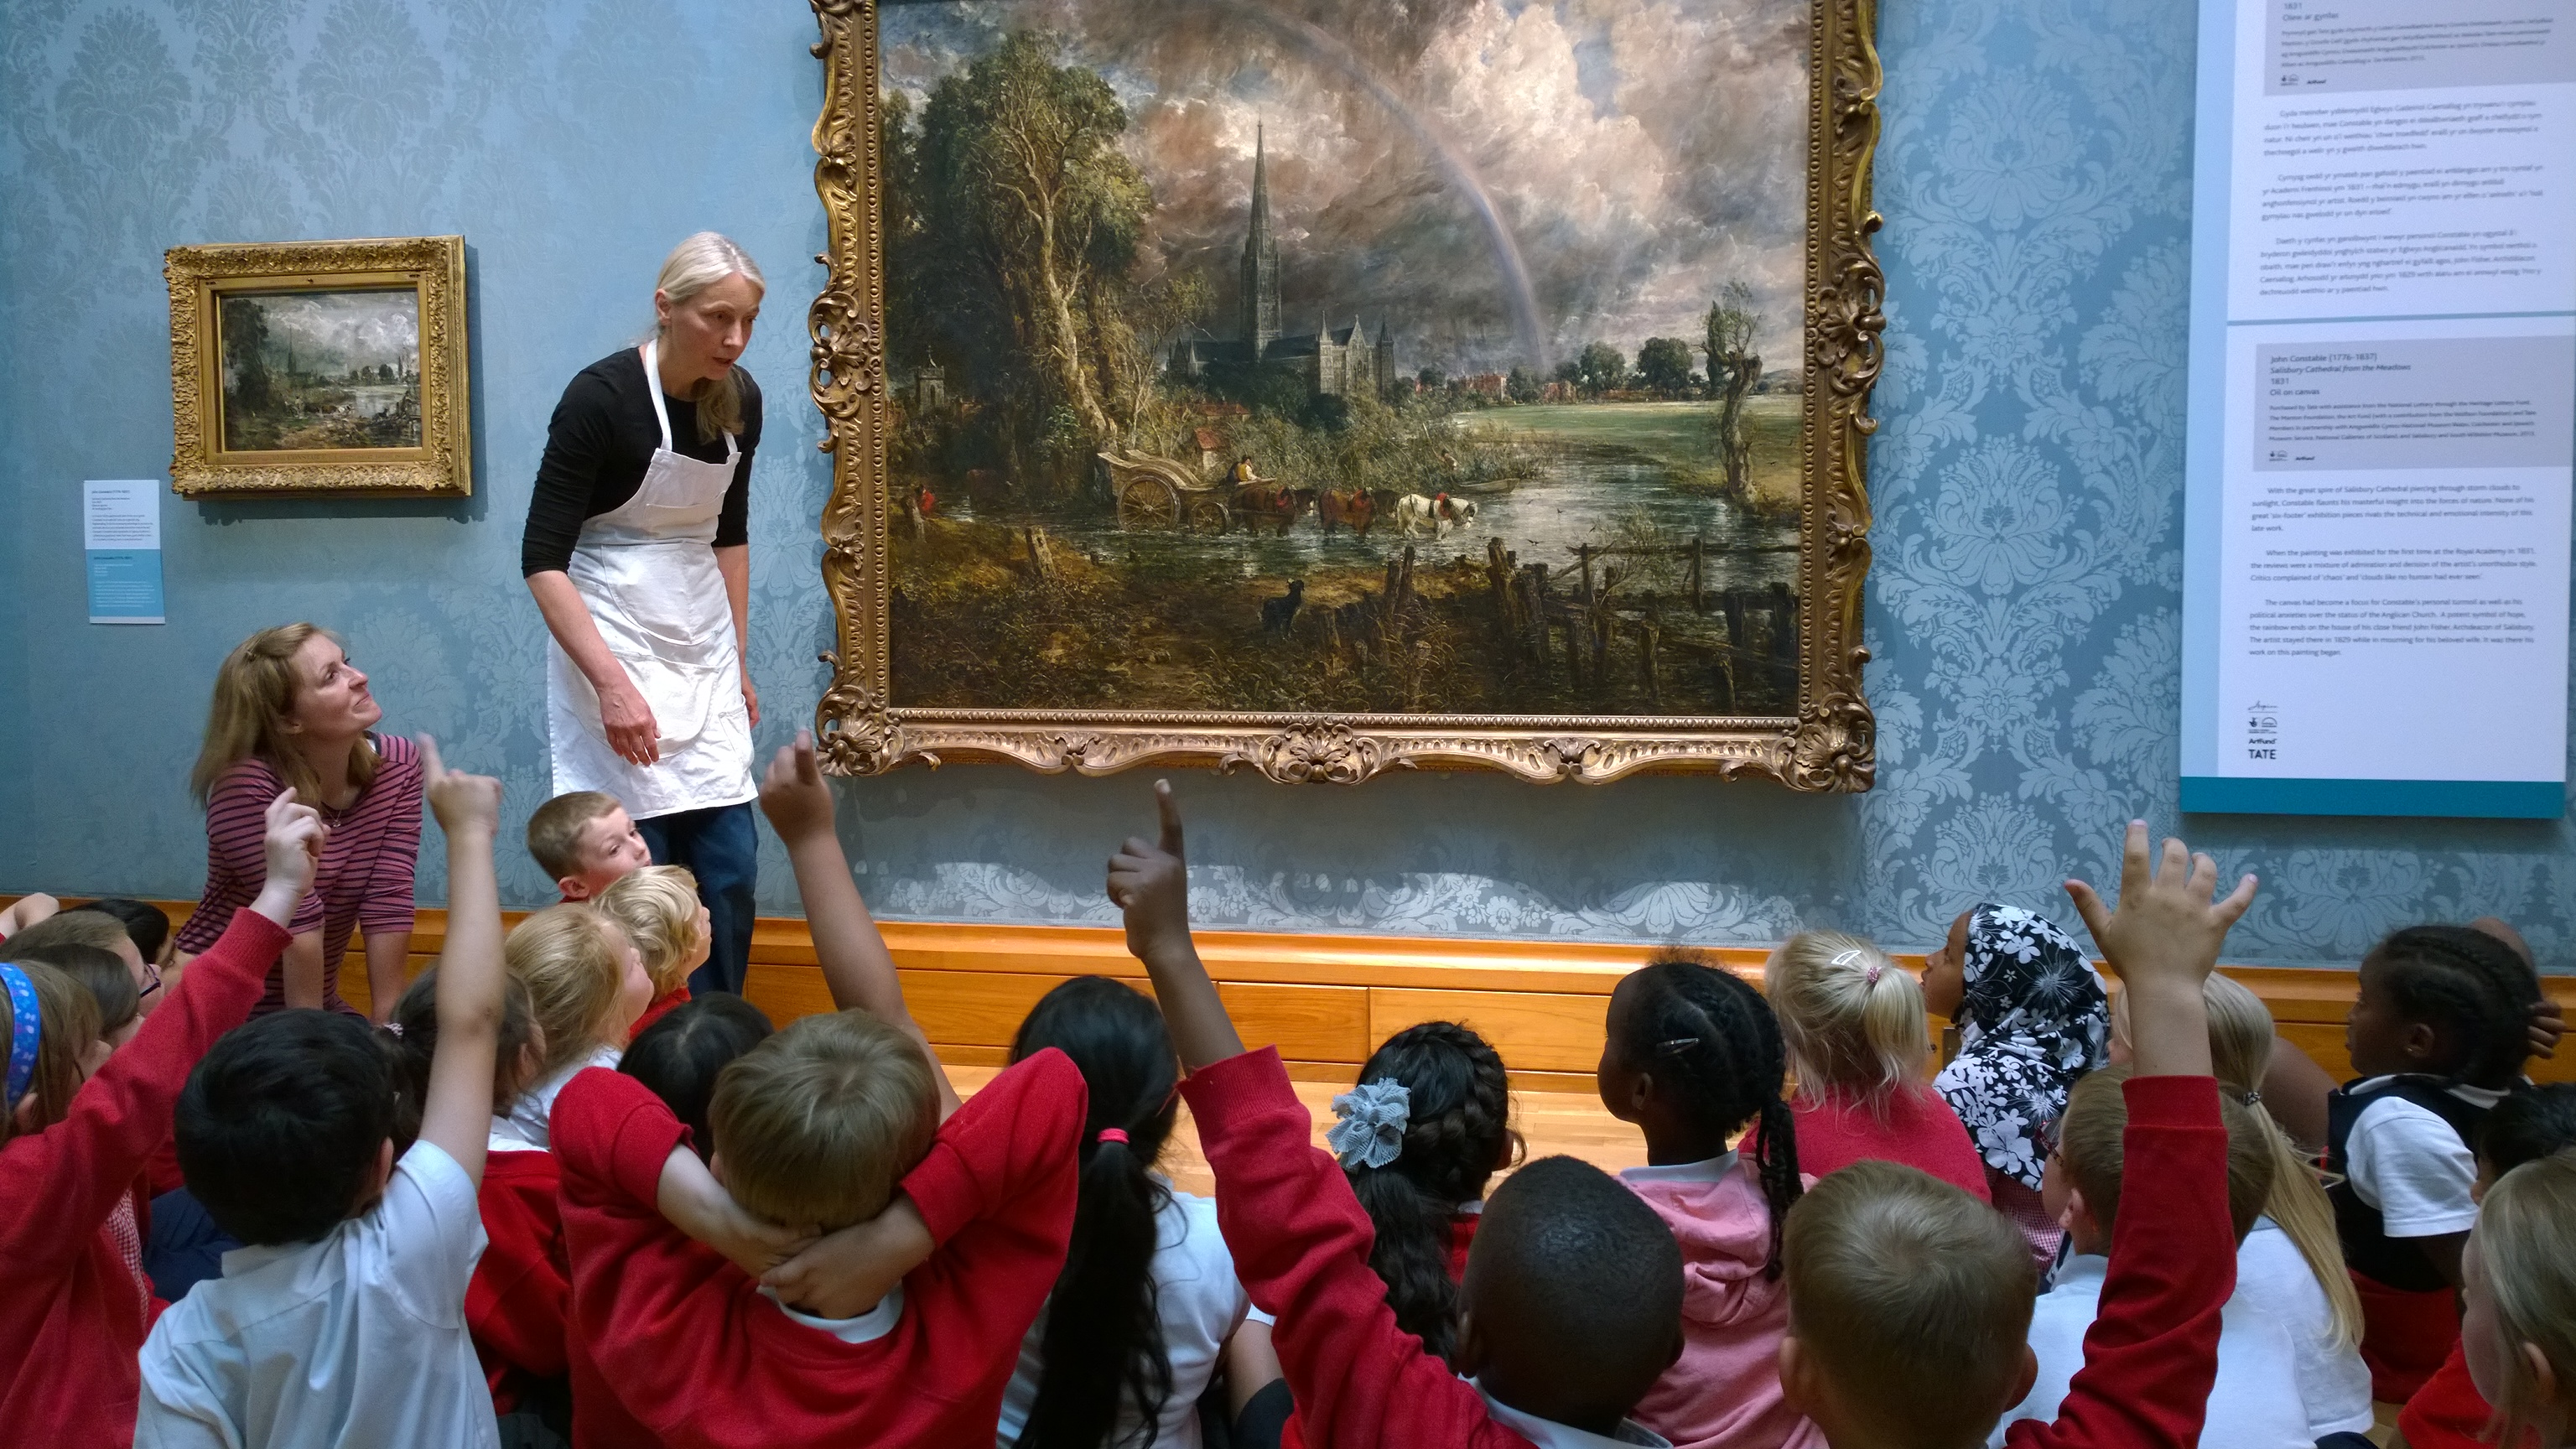 A group of school children sitting in an art gallery discussing Constable's painting with an artist